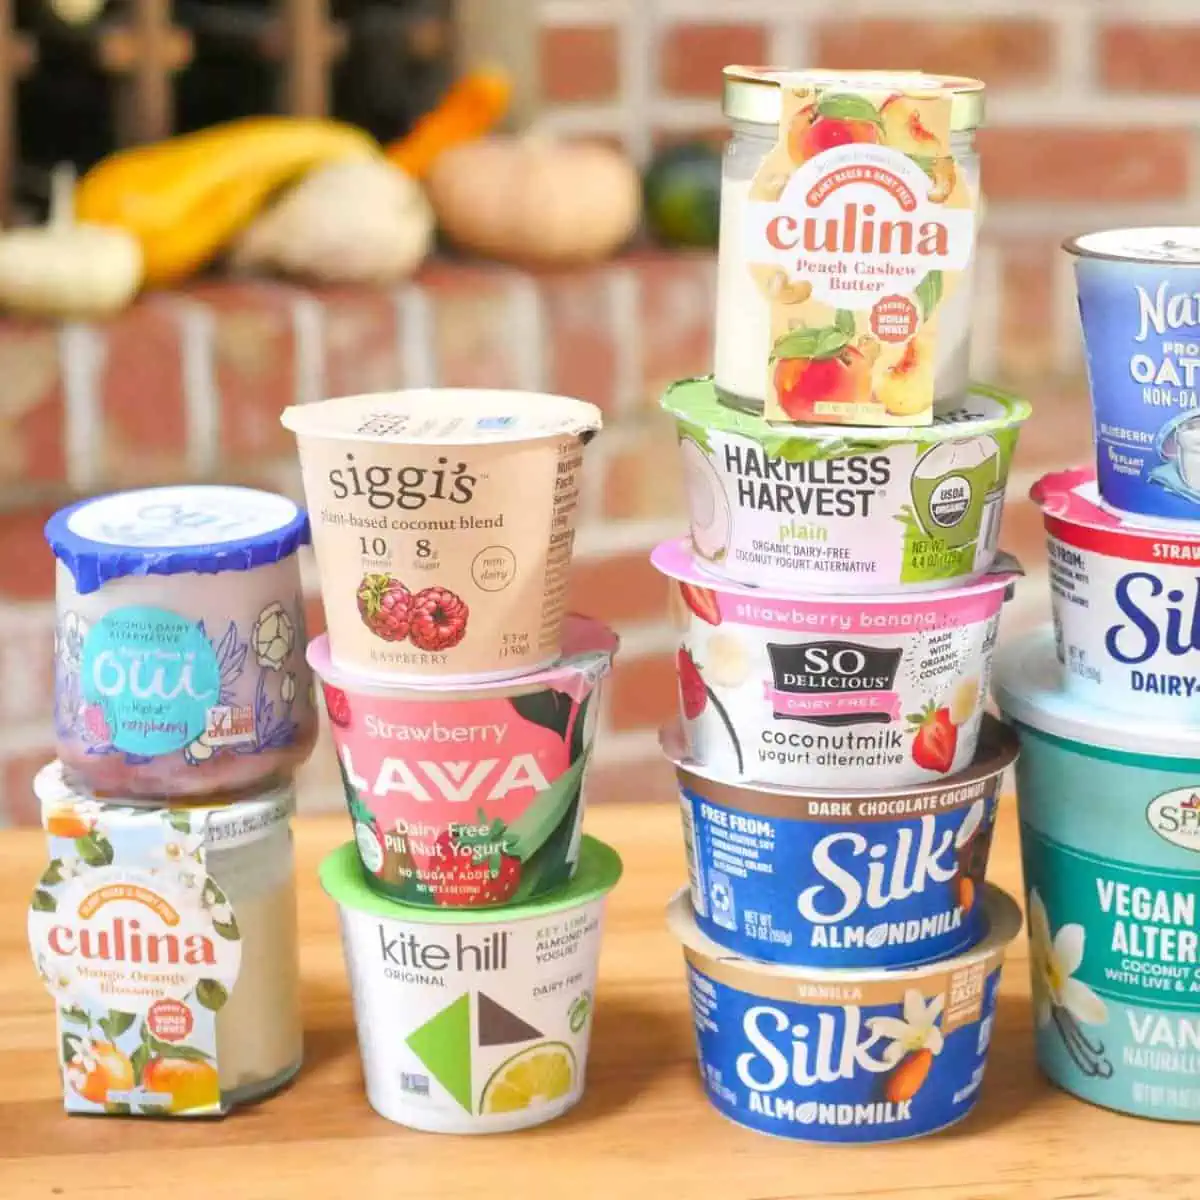 16 vegan yogurt brands in their containers stacked up on a table.